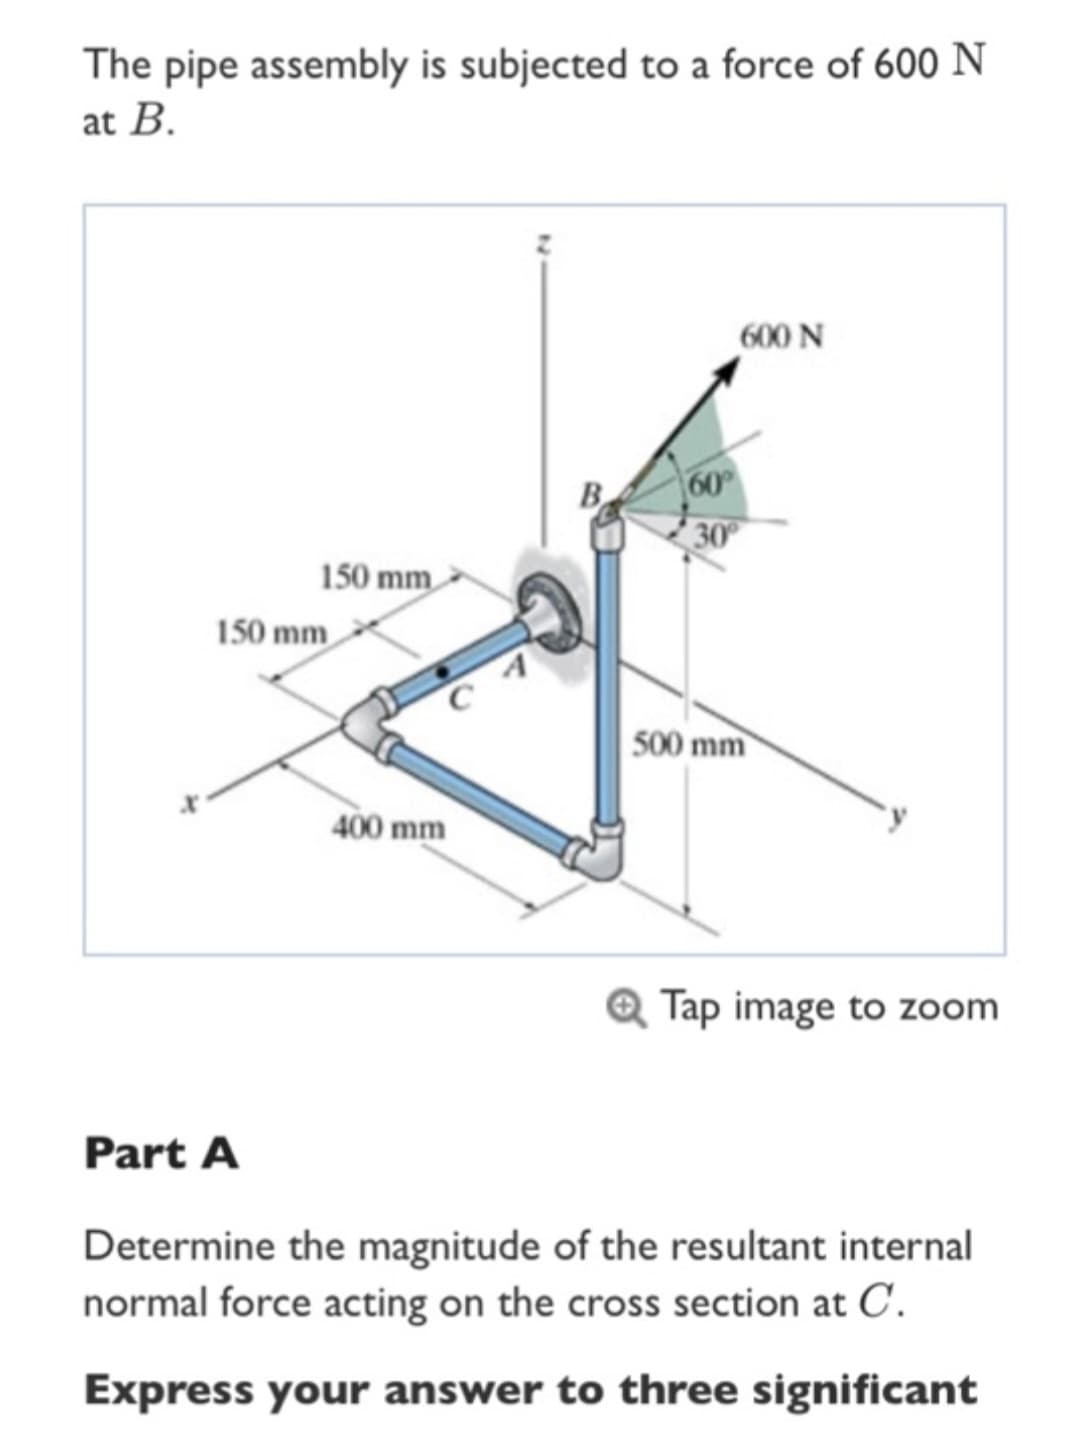 The pipe assembly is subjected to a force of 600 N
at B.
150 mm
150 mm
Part A
400 mm
B
60°
30°
600 N
500 mm
Tap image to zoom
Determine the magnitude of the resultant internal
normal force acting on the cross section at C.
Express your answer to three significant